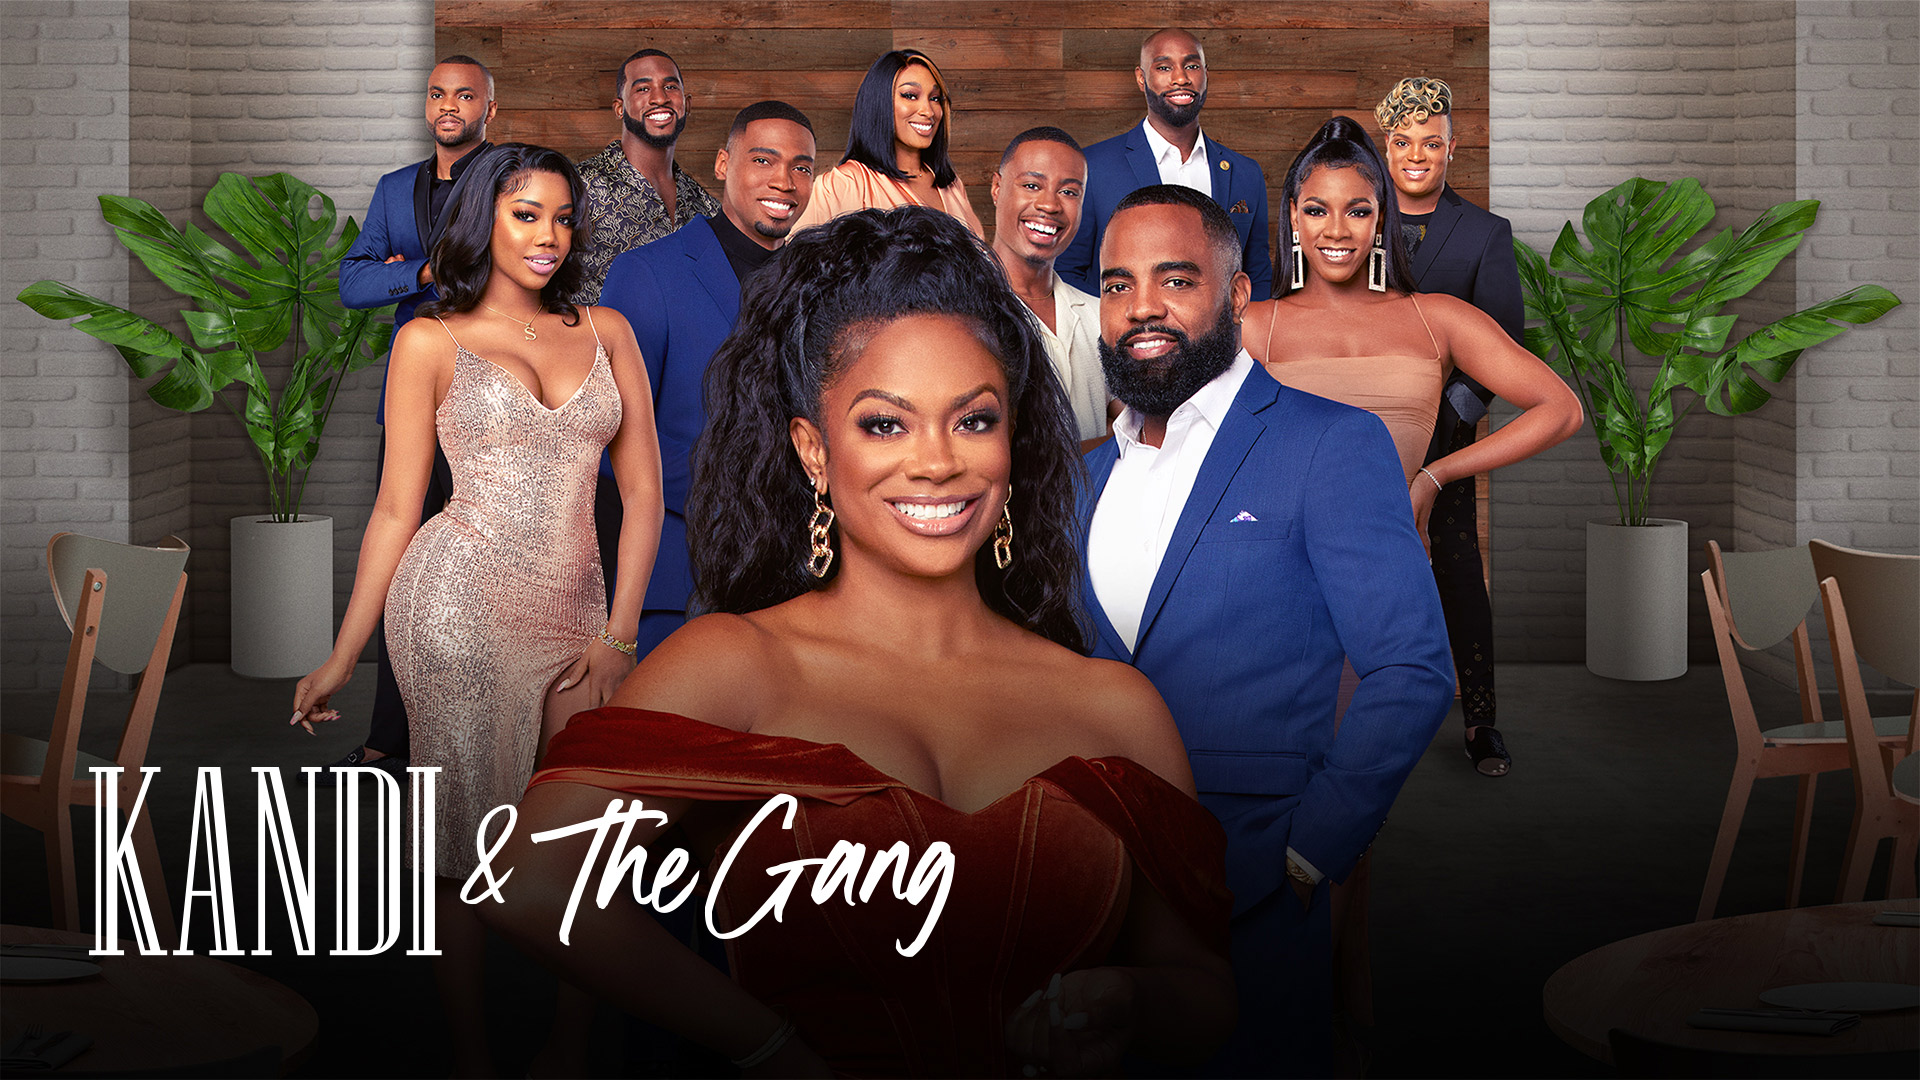 Kandi & the Gang - New Series March 6. Go to a video page.